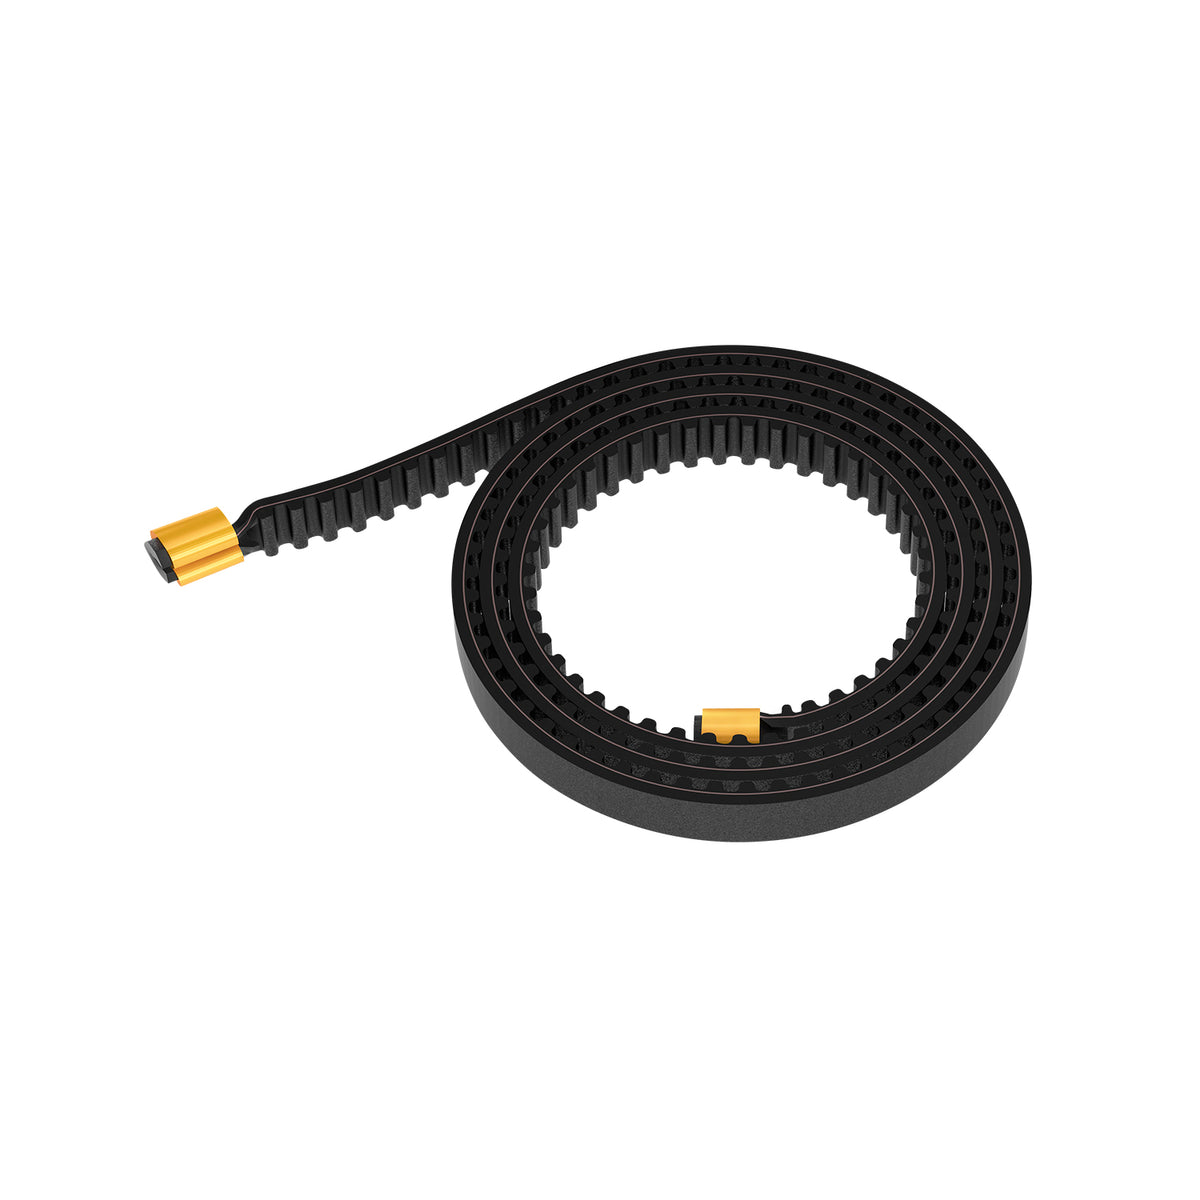 Creality Ender 3 Max X and Y-axis Synchronous Timing Belt